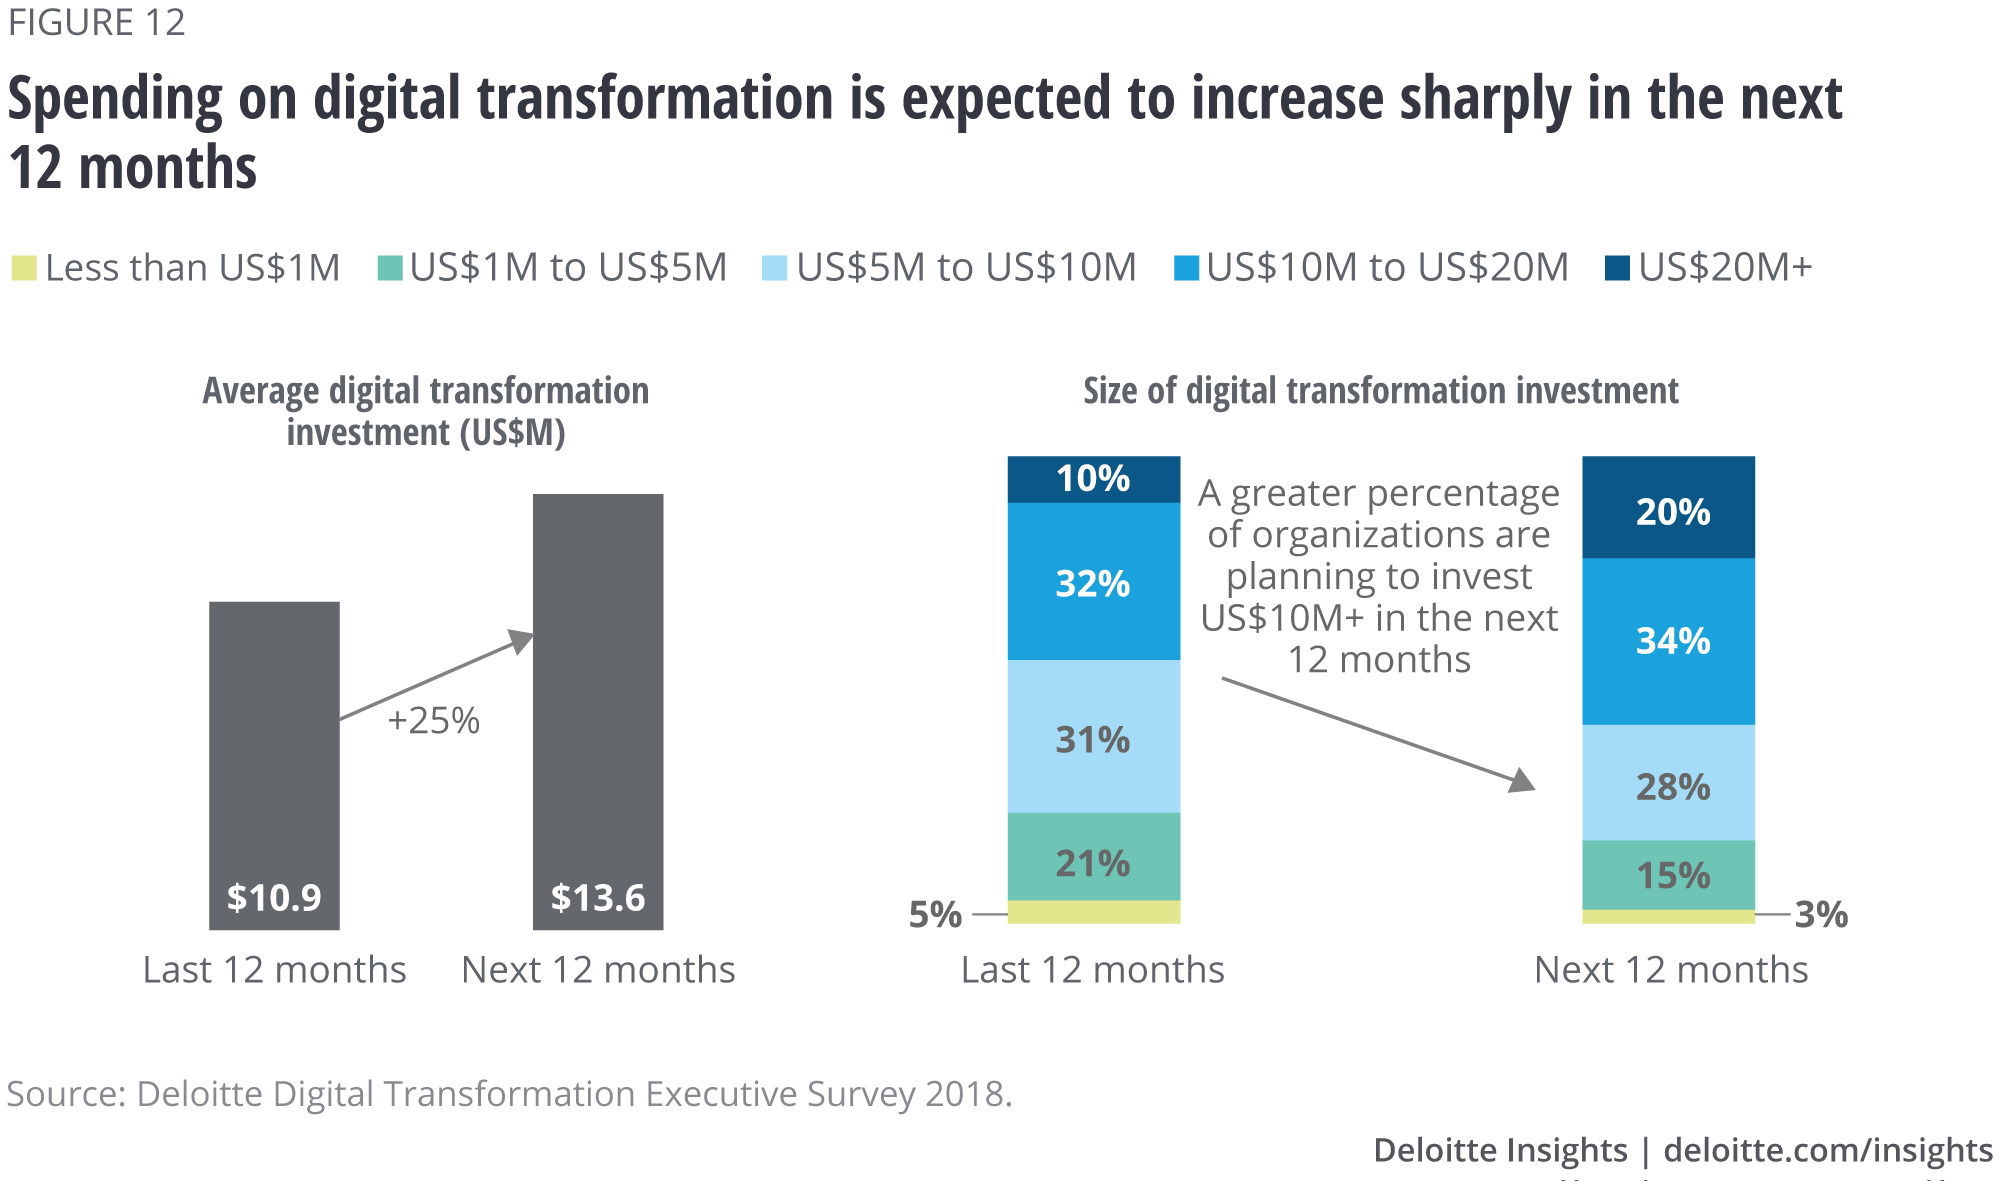 Spending on digital transformation is expected to increase sharply in the next 12 months